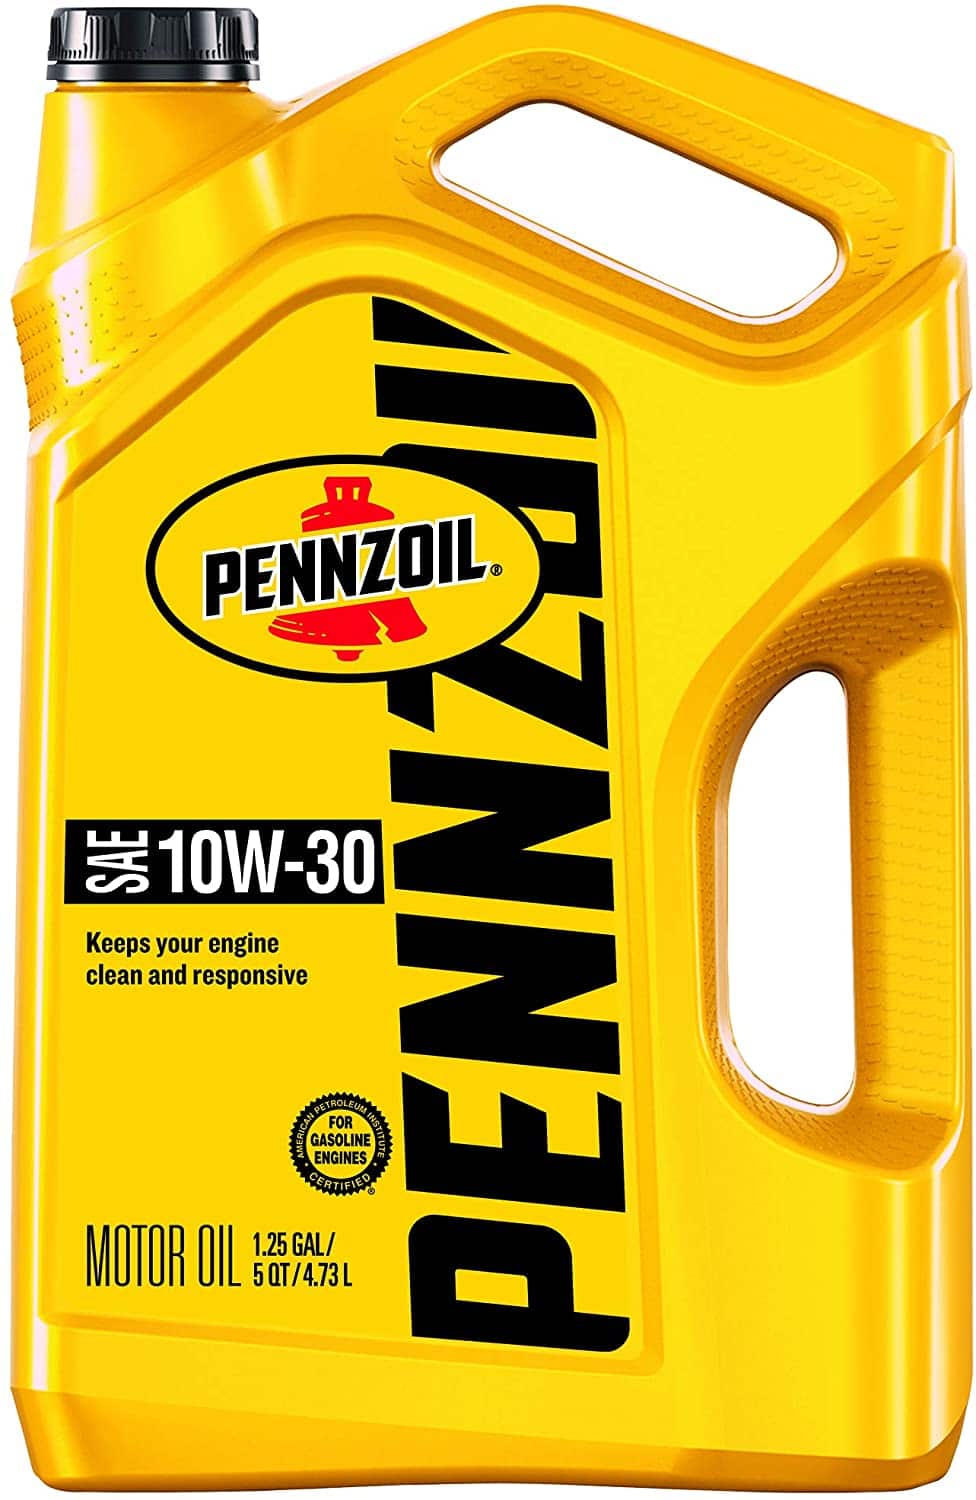 Pennzoil Conventional 10W-30 Motor Oil